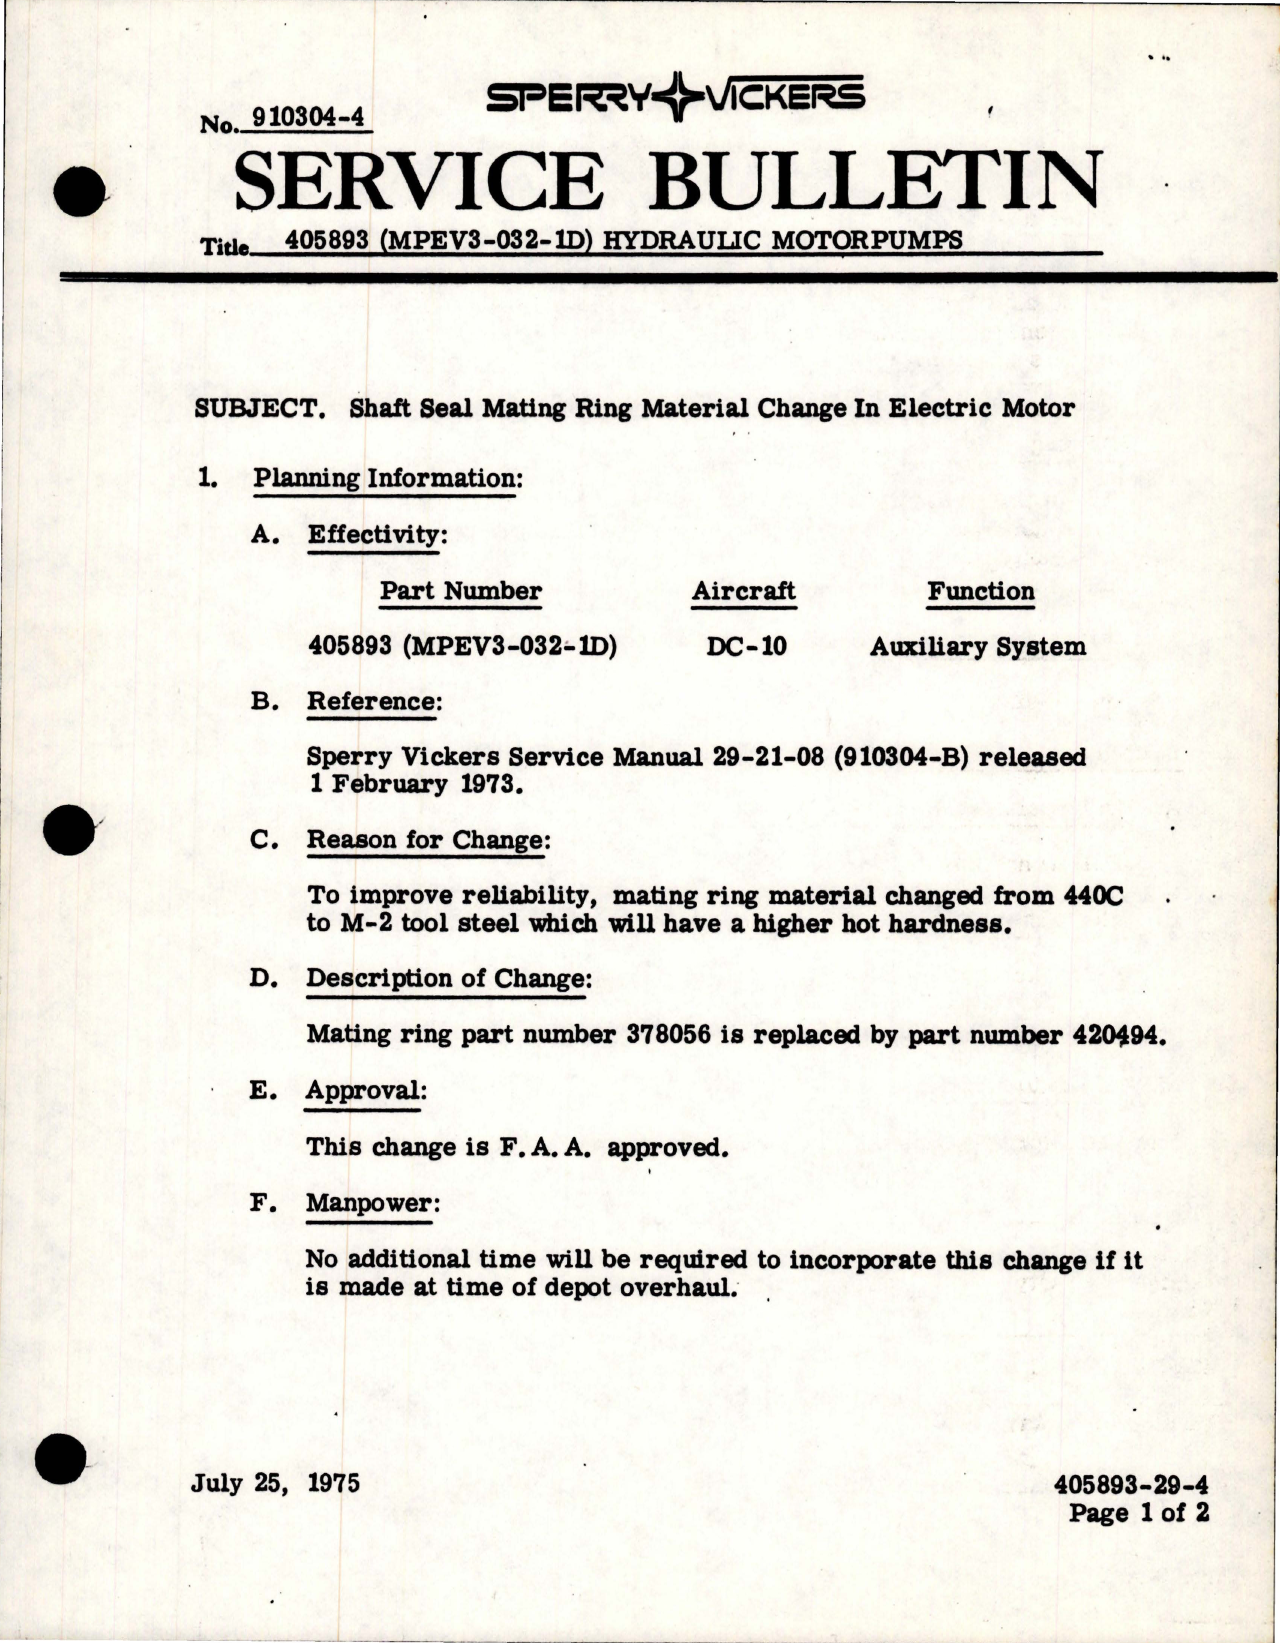 Sample page 1 from AirCorps Library document: Hydraulic Motorpump - Shaft Seal Mating Ring Material Change in Electric Motor - Part 405893 - Model MPEV3-032-1D